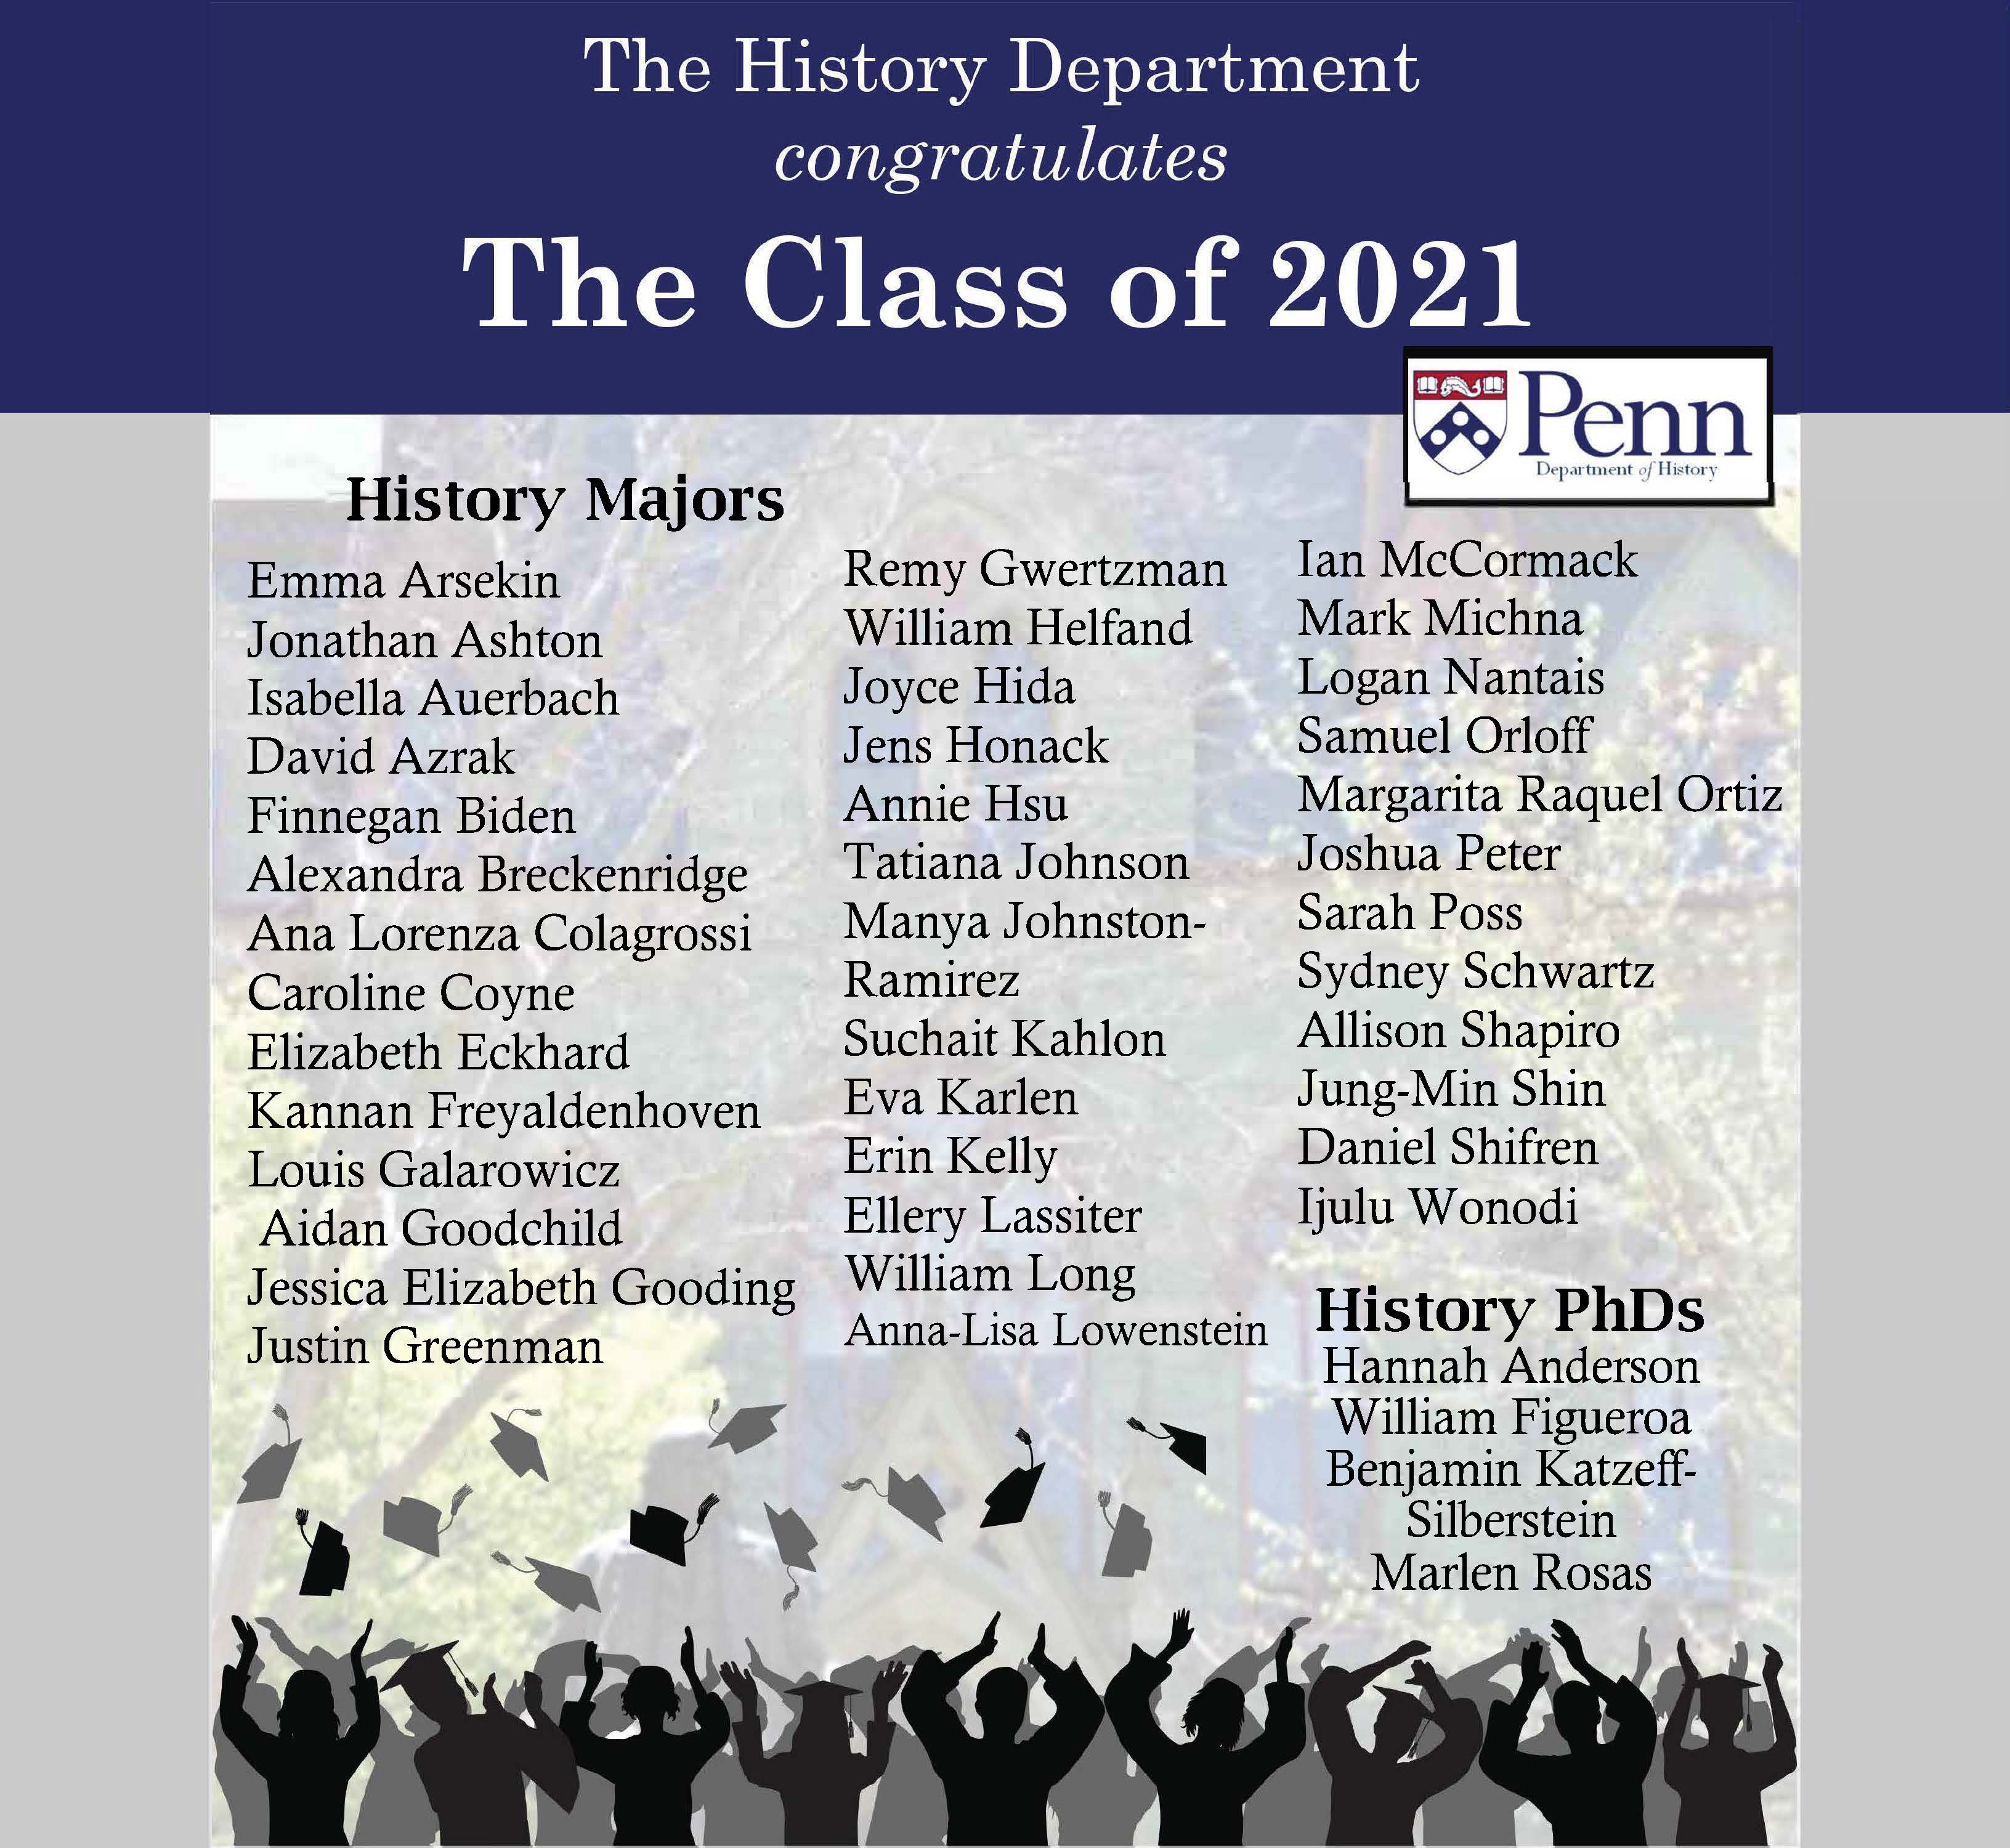 Announcement of history majors and graduating PhDs